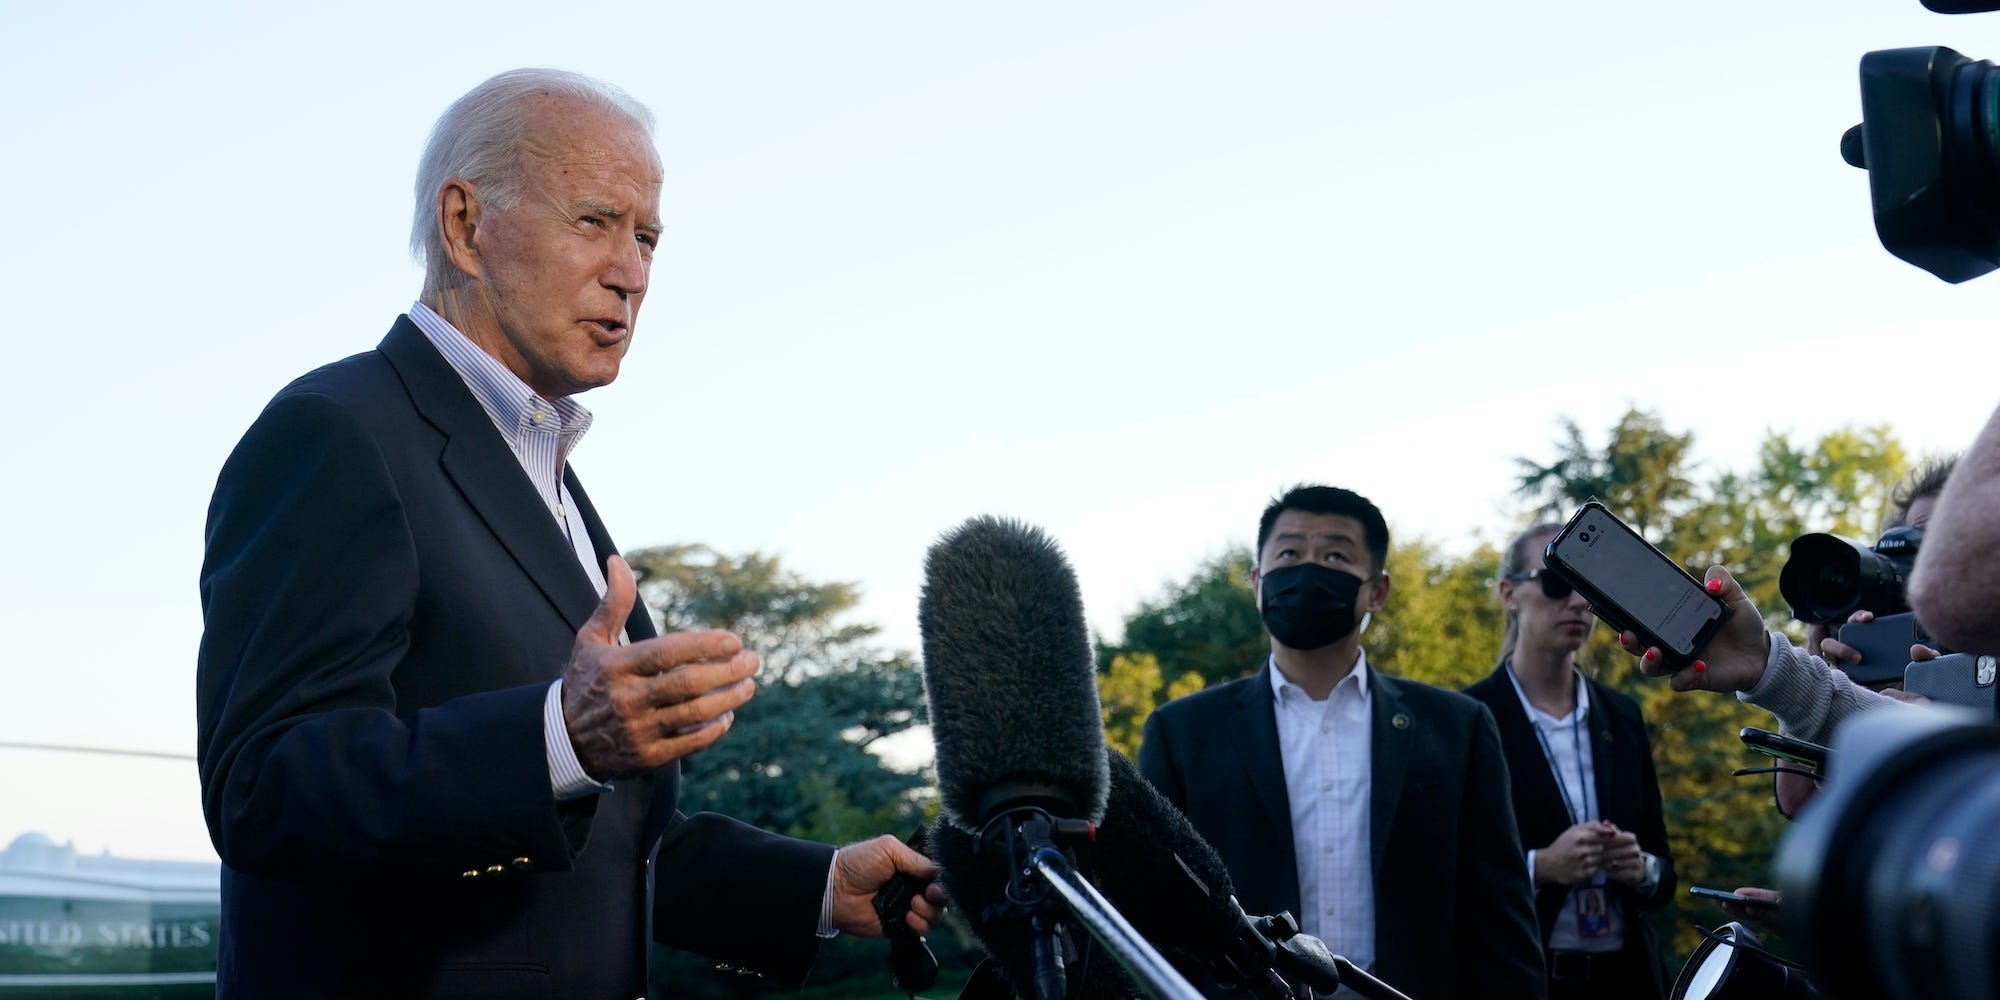 President Joe Biden talks with reporters after landing on Marine One on the South Lawn of the White House in Washington, Tuesday, Sept. 7, 2021, after returning from a trip to New York and New Jersey to survey damage from the remnants of Hurricane Ida.